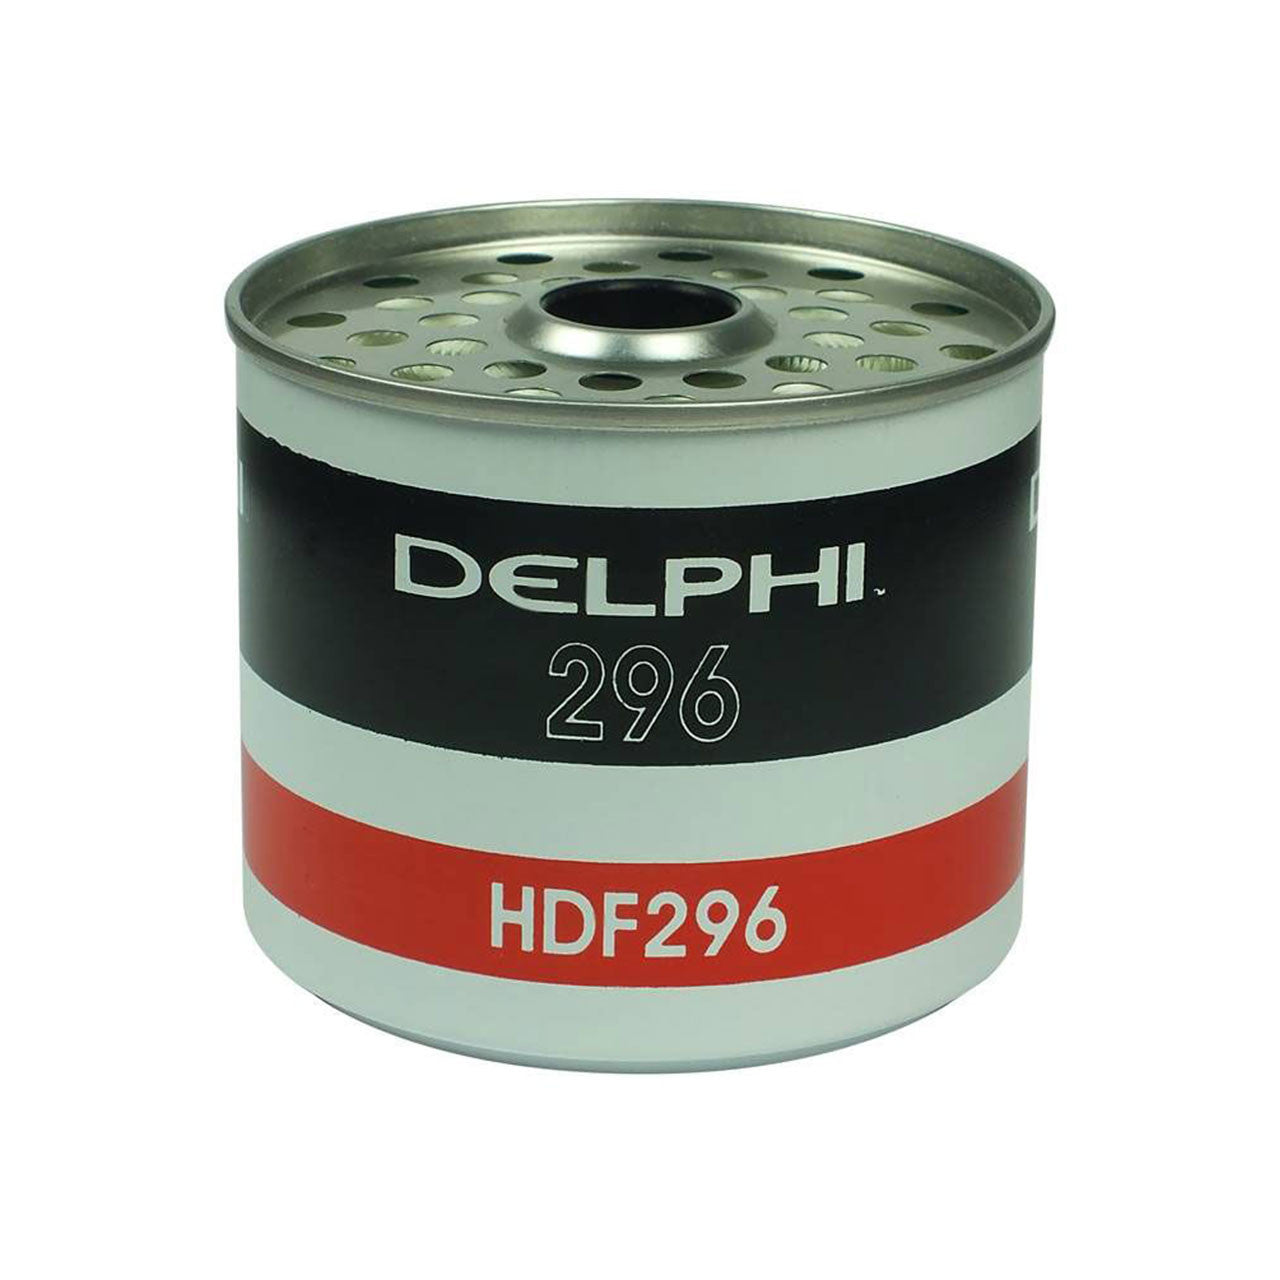 Delphi Replacement Fuel Filter HDF296 For C.A.V. 5836B100